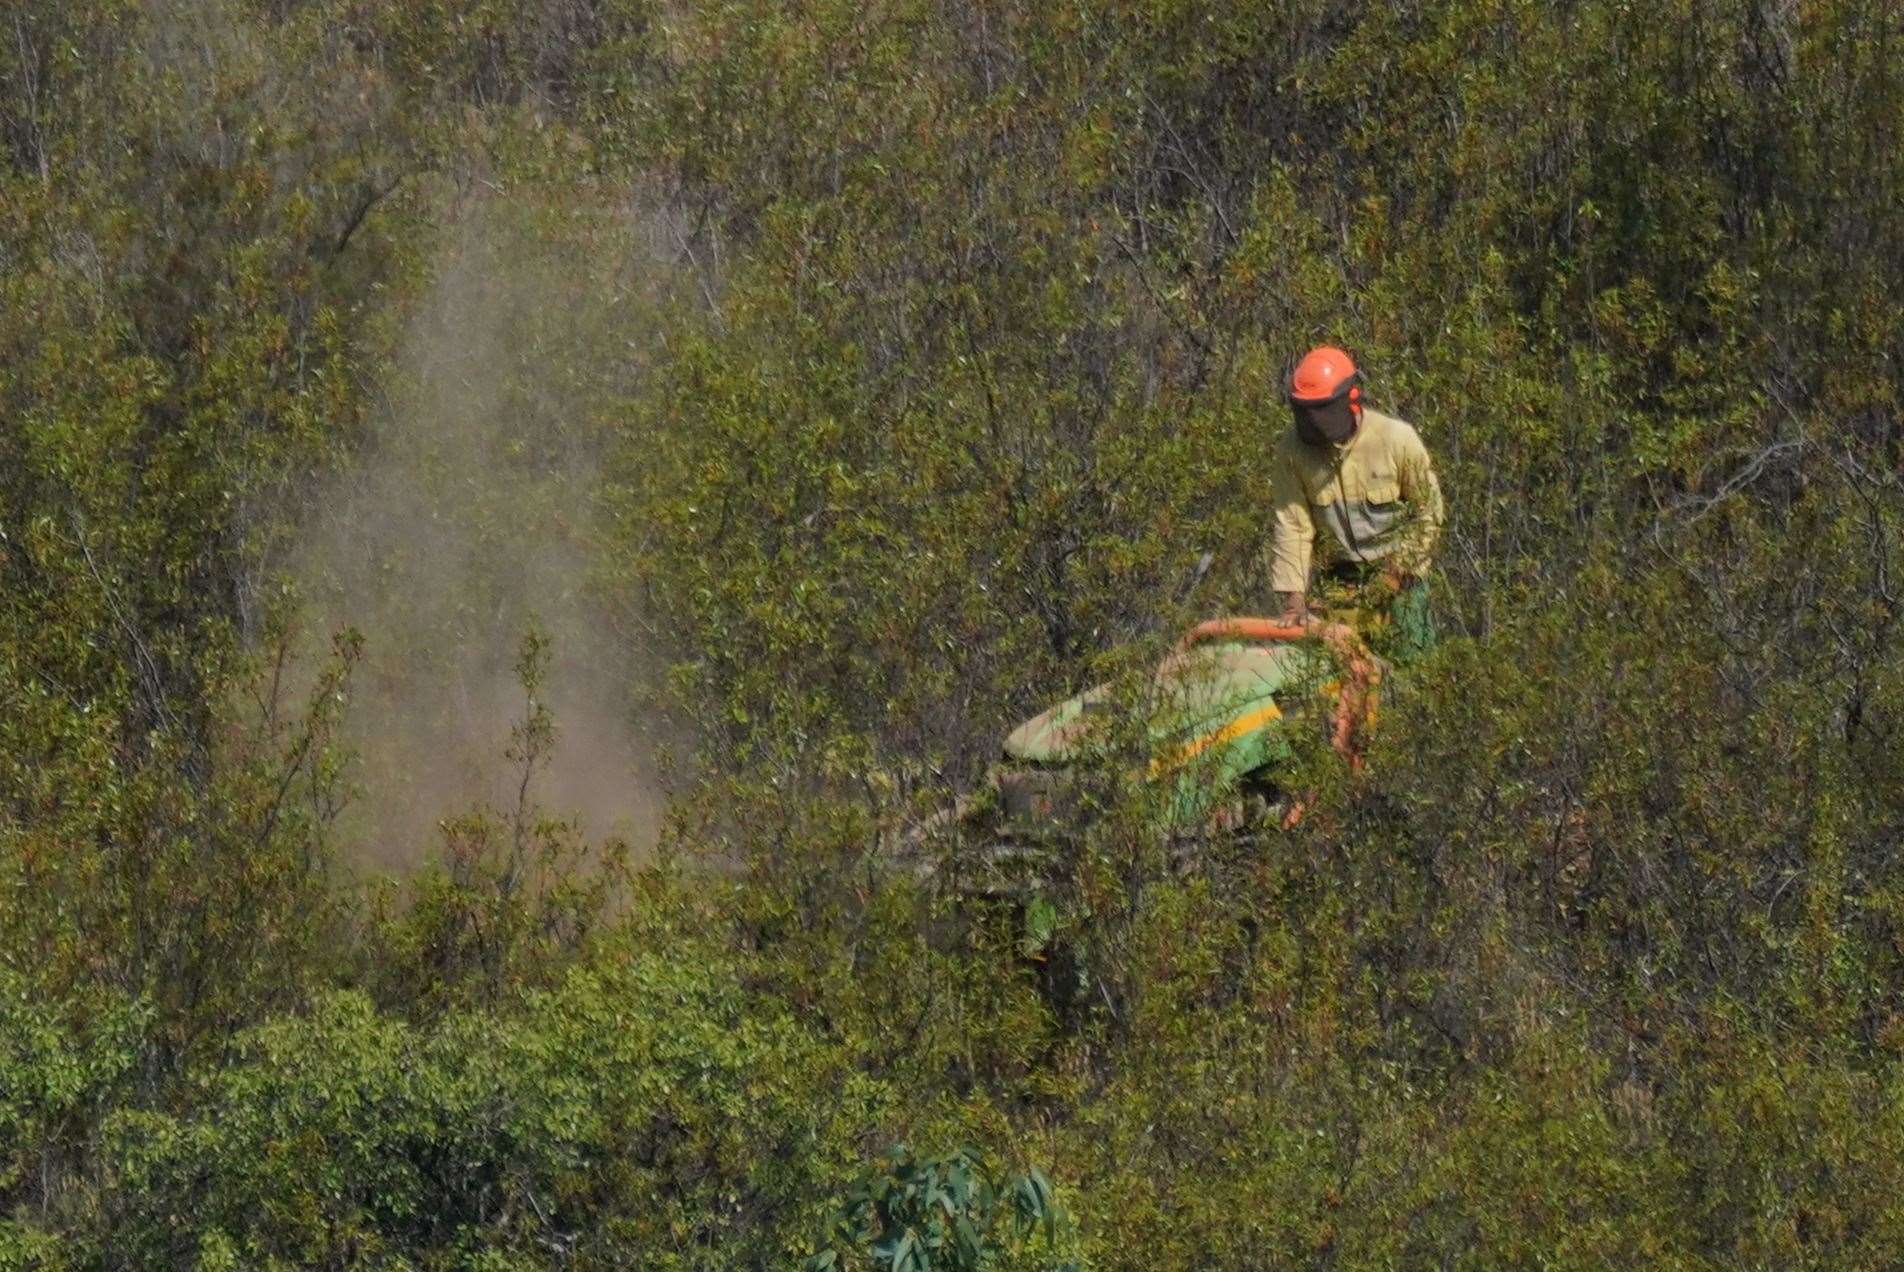 Personnel clear undergrowth with machinery at Barragem do Arade reservoir (Yui Mok/PA)